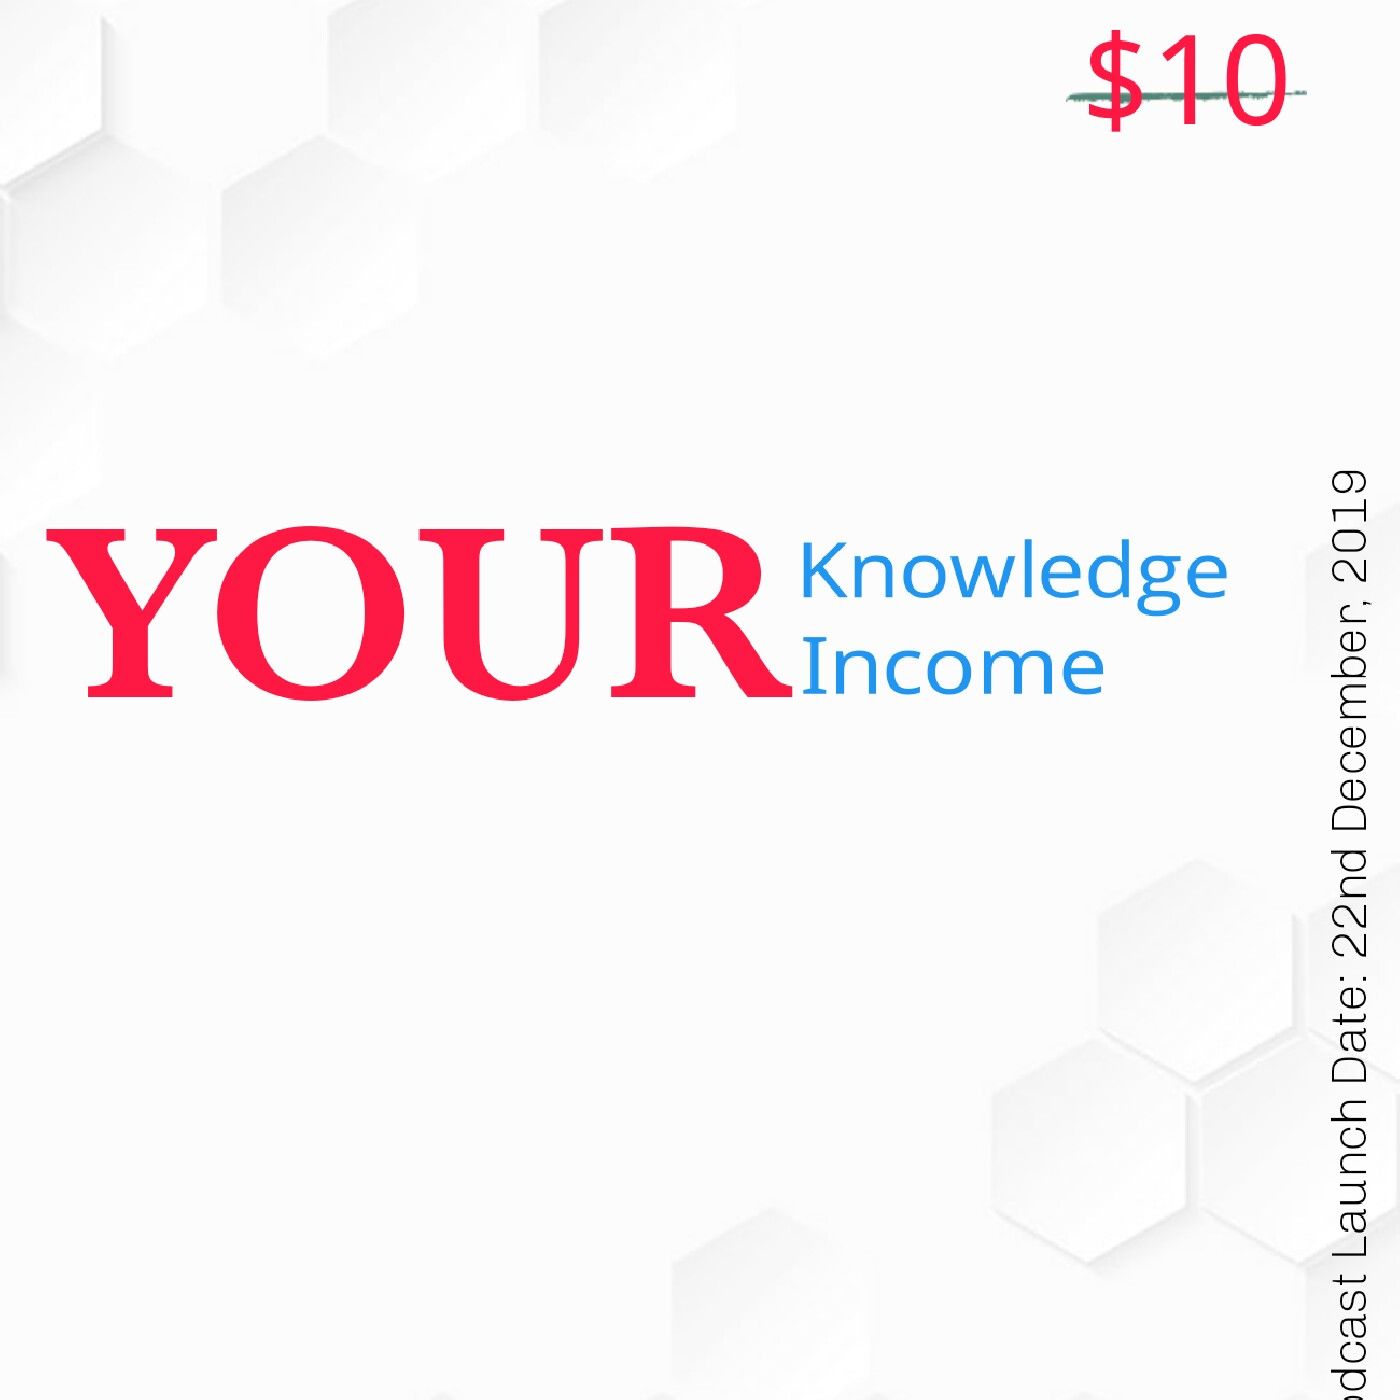 Your Knowledge, Your Income